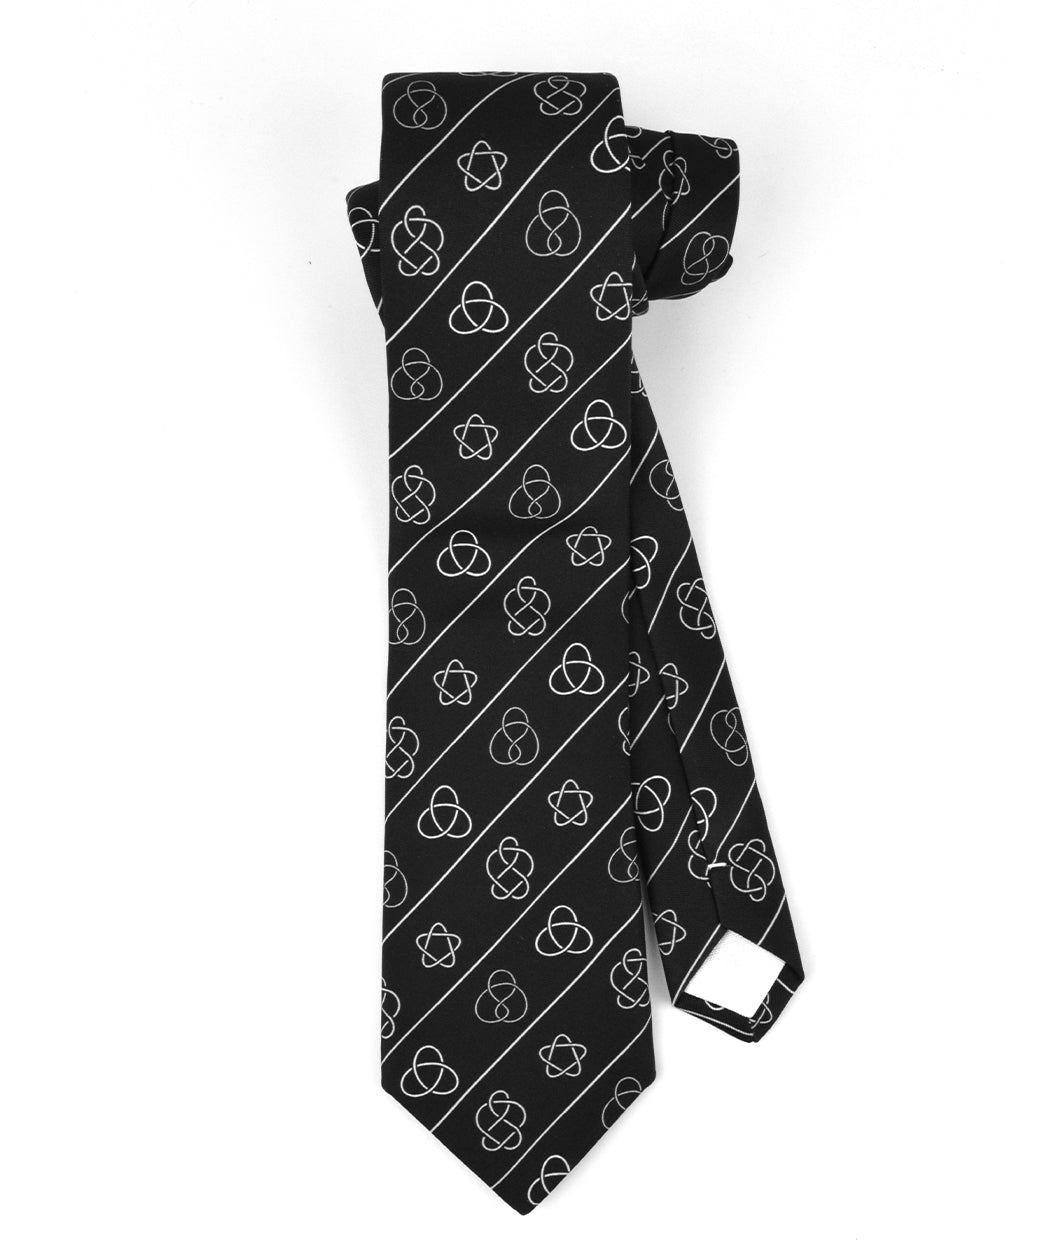 Black tie with alternating white lines and different designs of mathematical knot diagrams by 3Blue1Brown.